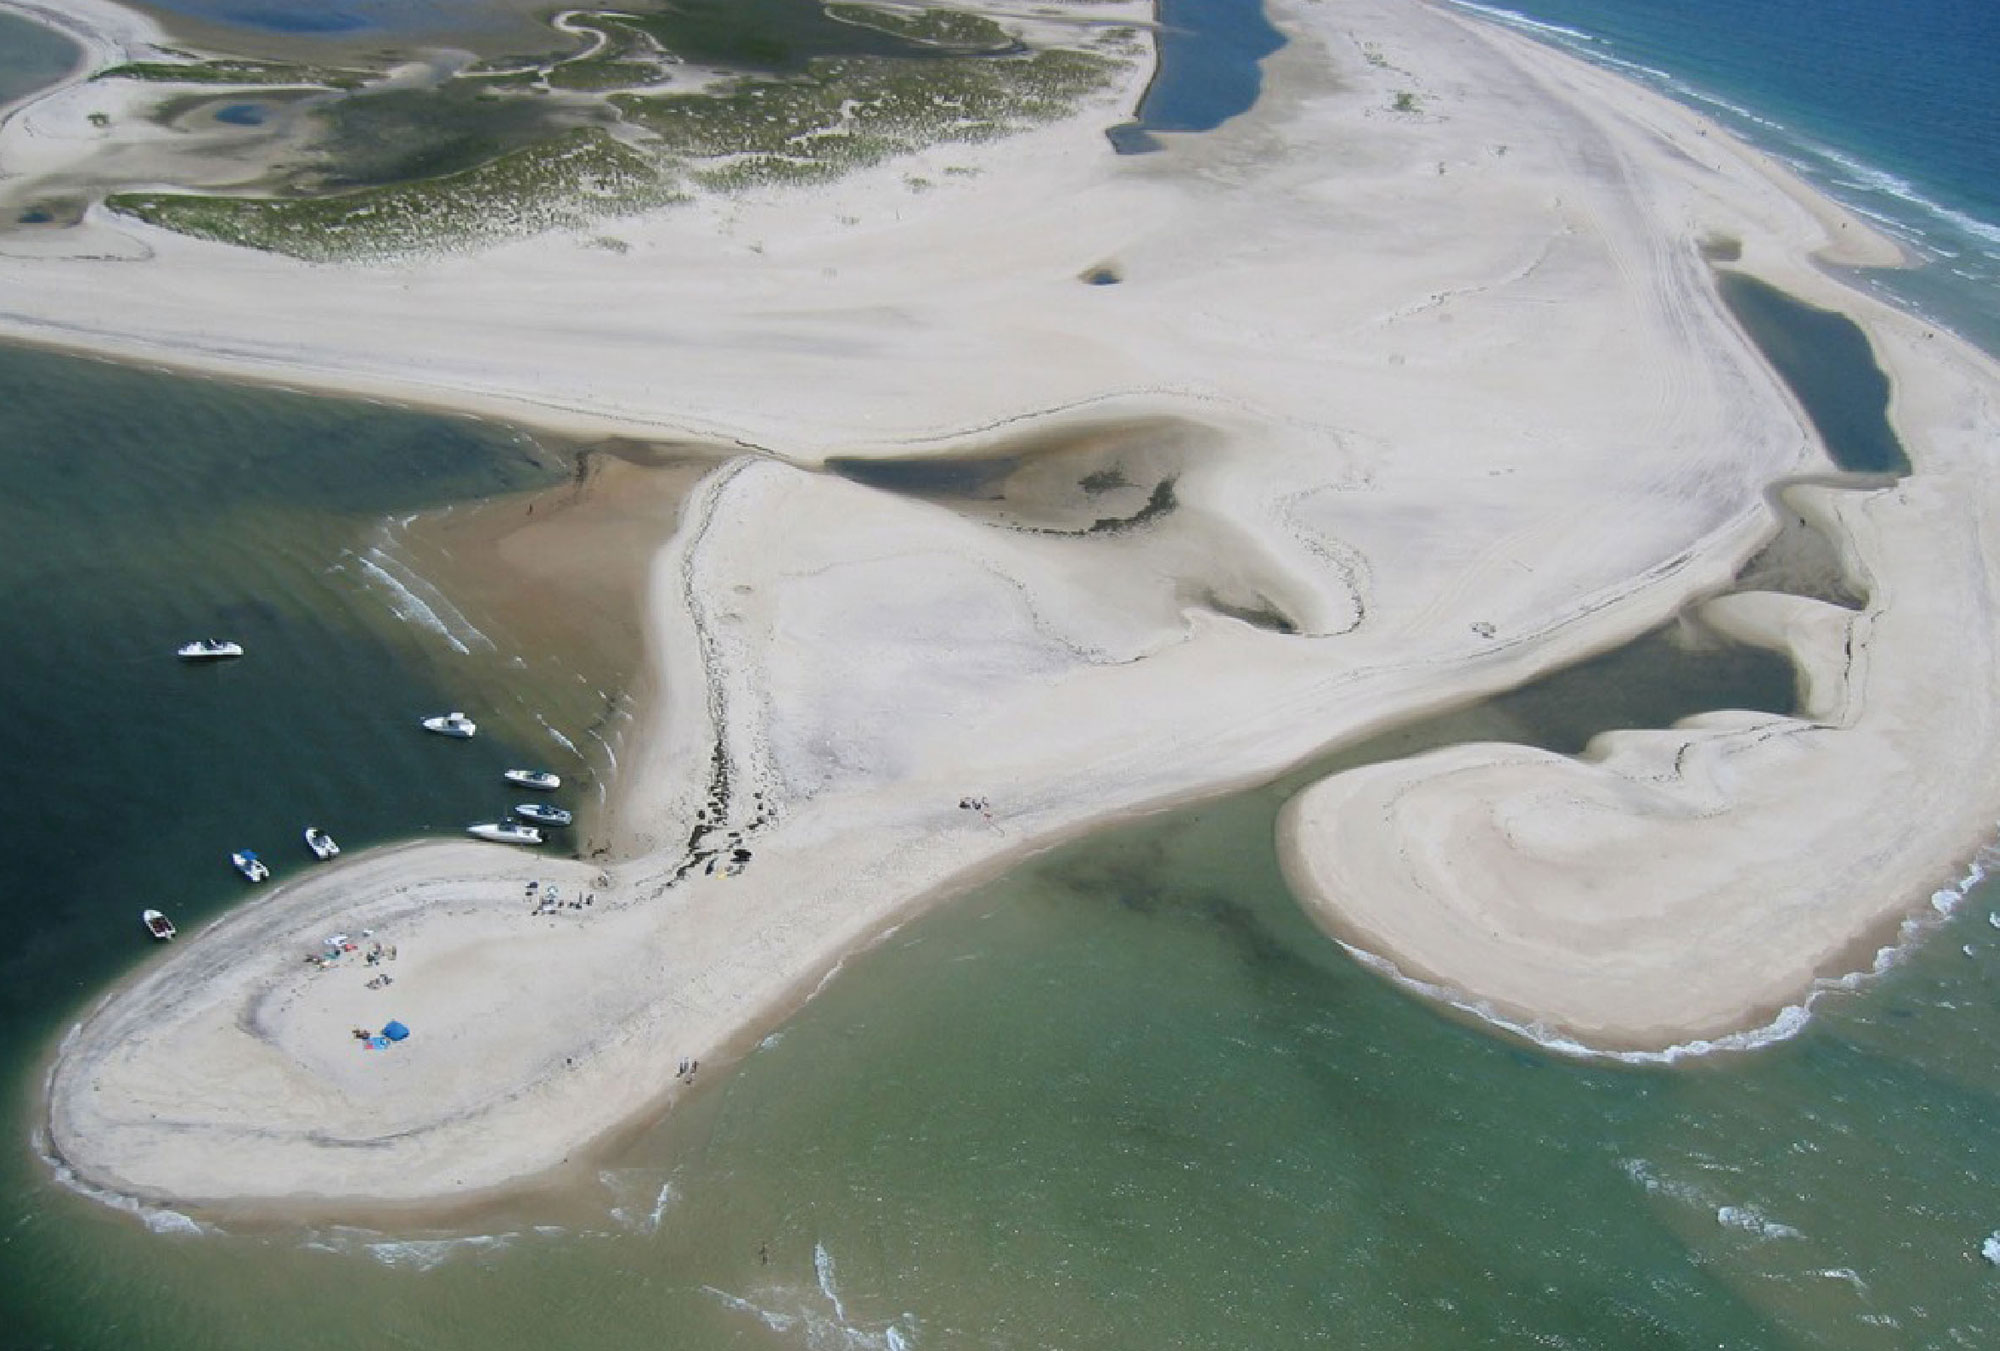 Photograph of sandy beaches at Fire Island, New York. The beaches are made up of reworked moraine sediments.